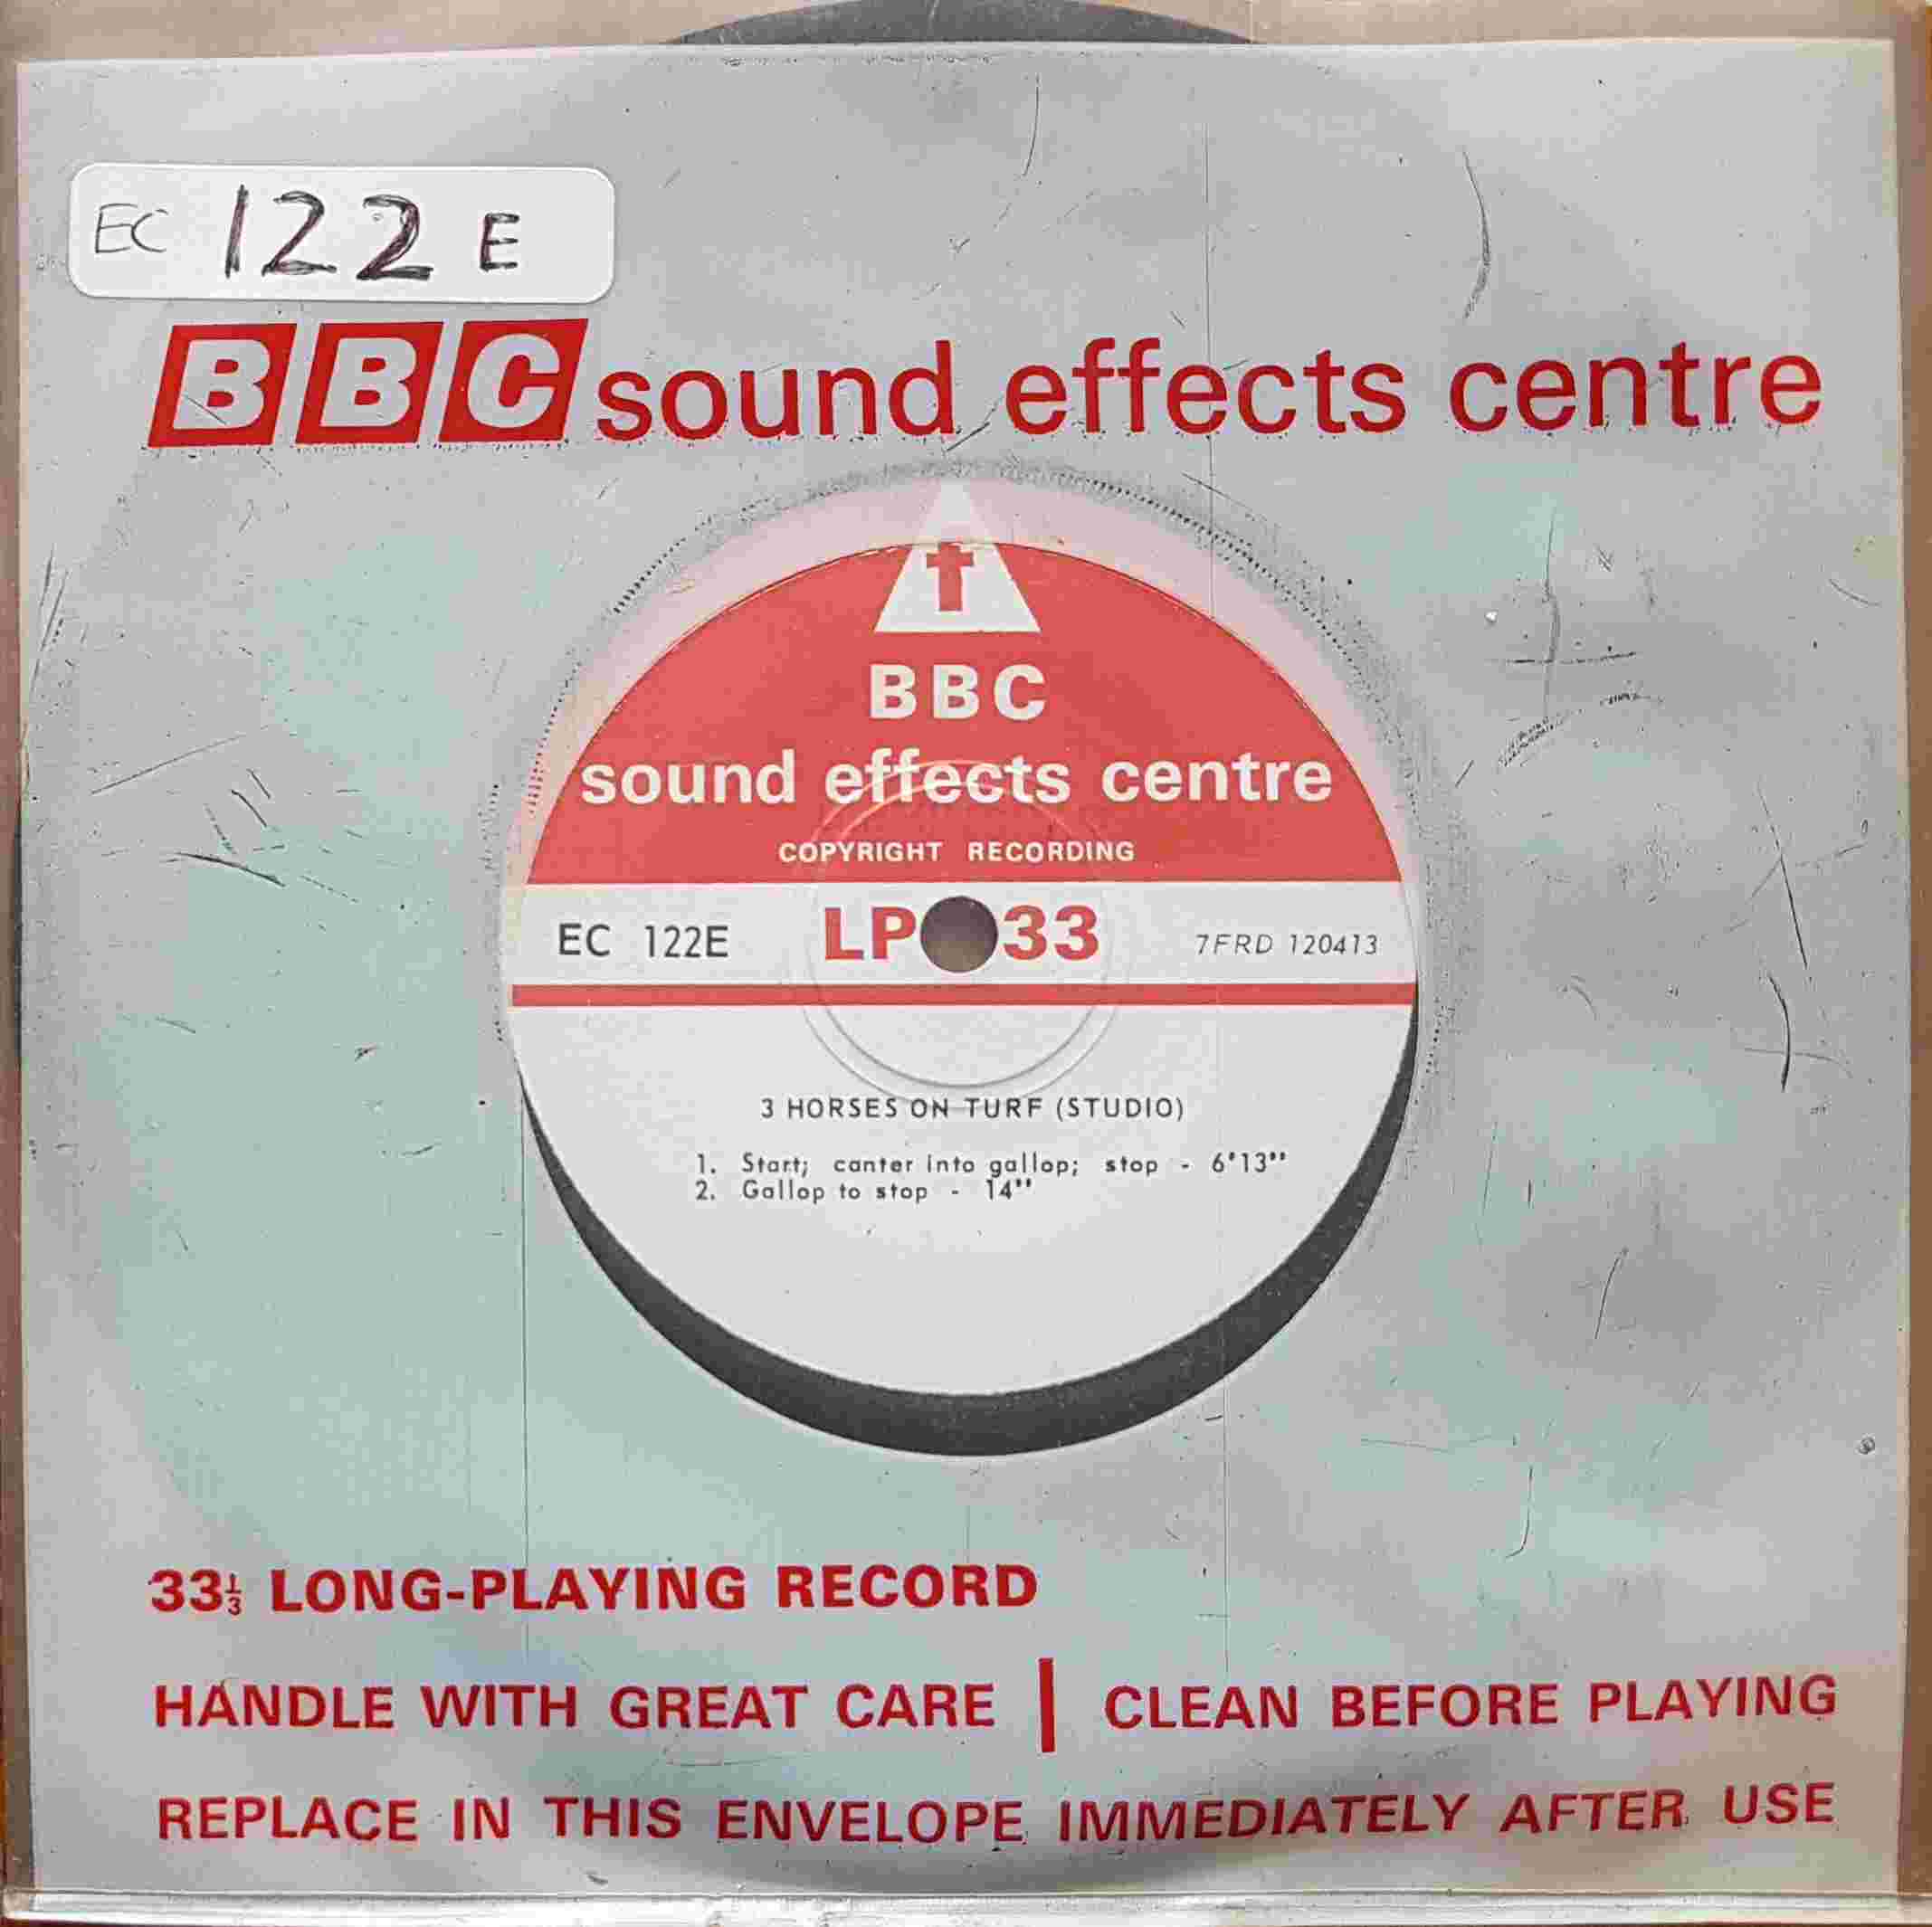 Picture of EC 122E 3 horses on turf (Studio) / 6 horses on turf (Studio) by artist Not registered from the BBC singles - Records and Tapes library